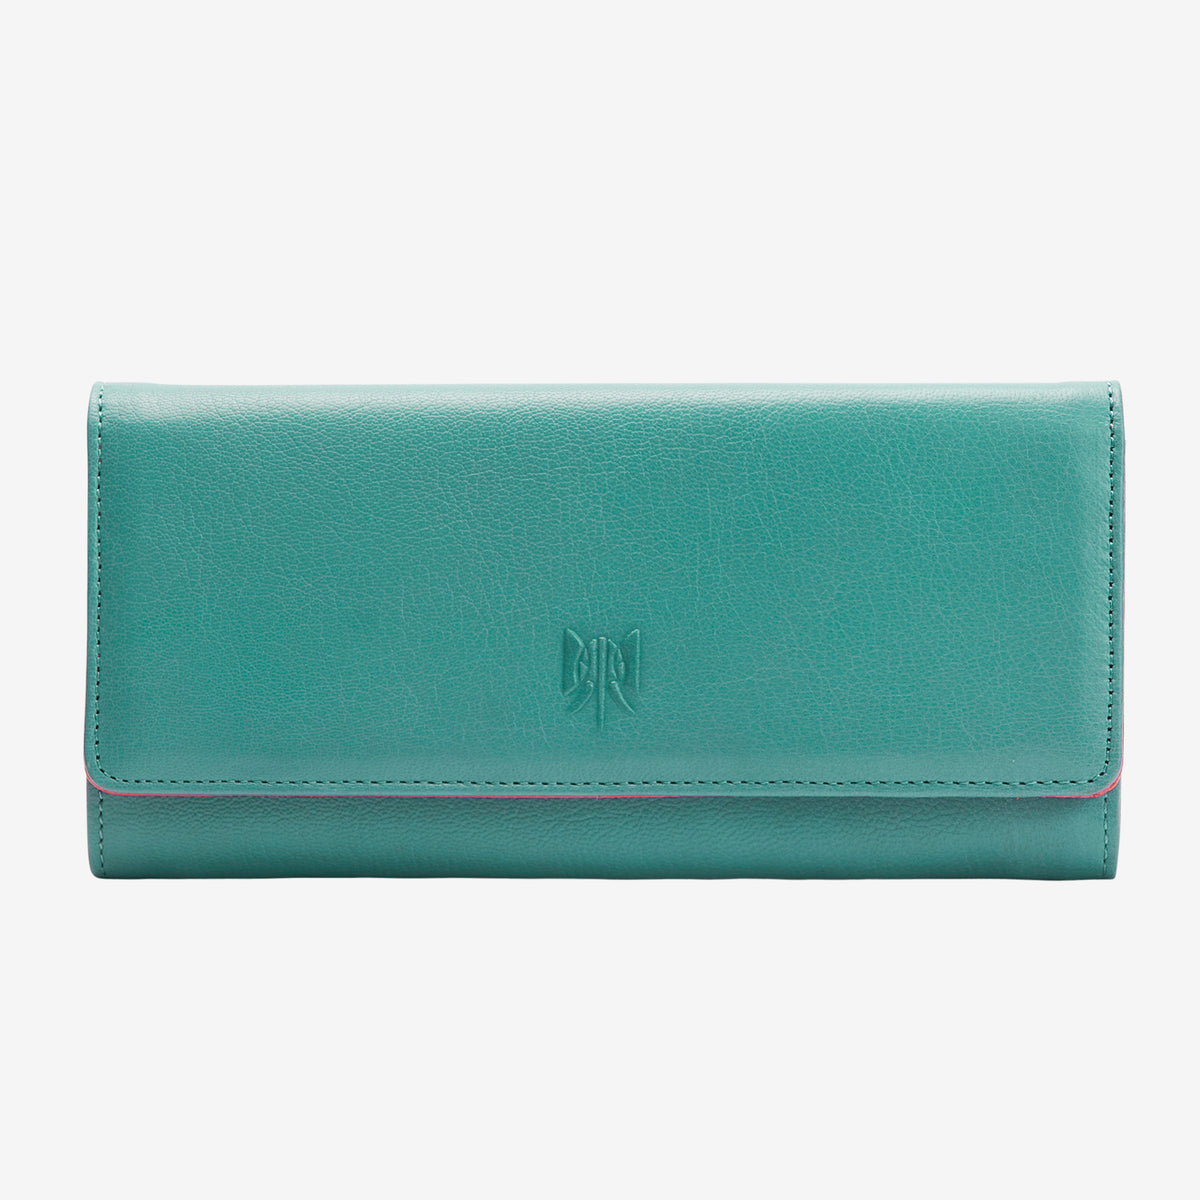 Siam Gusseted Business Card Case French BLUE/GERANIUM